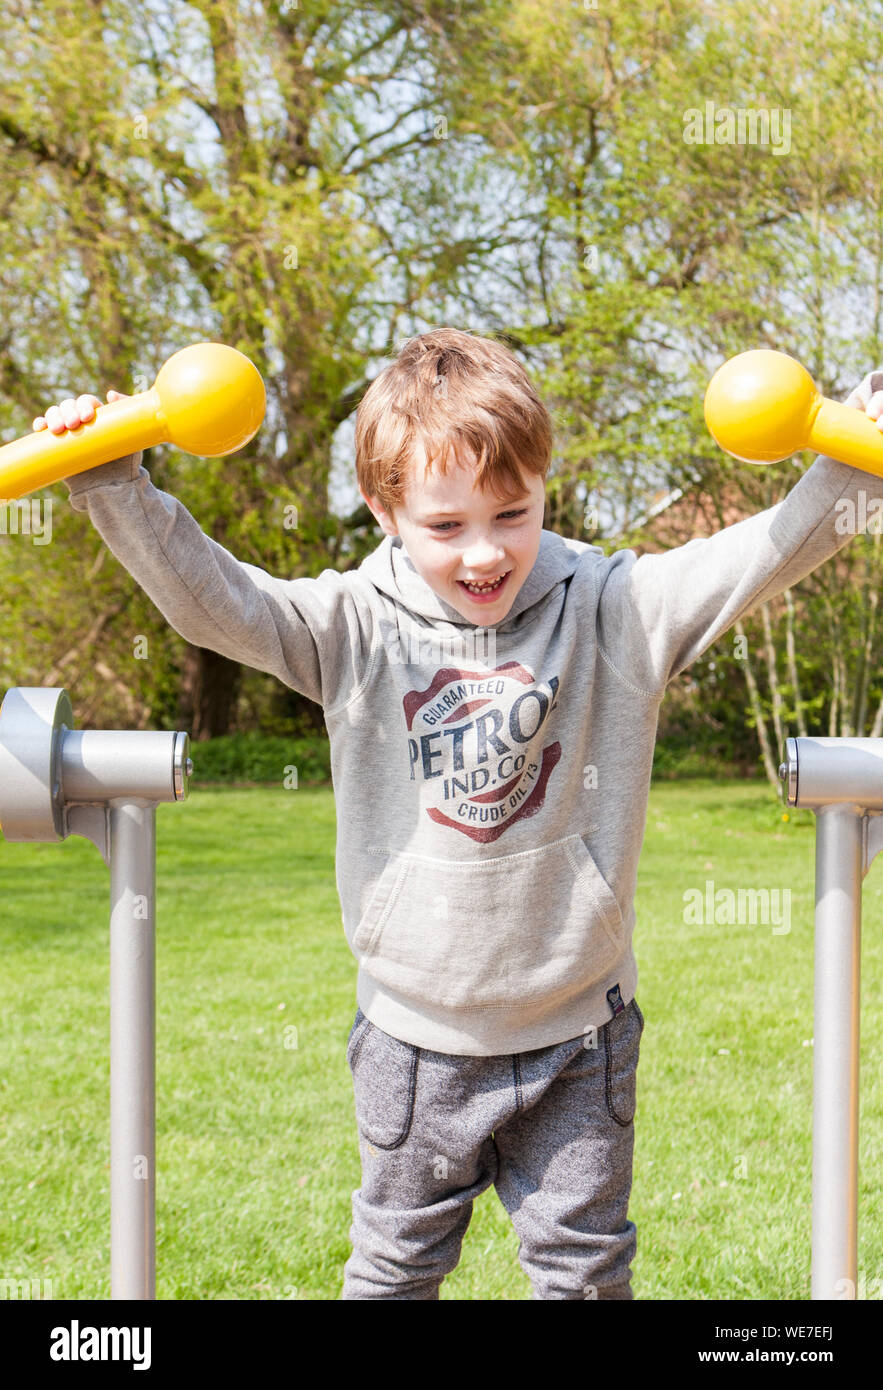 A young boy using the outdoor exercise machine in a park gym Stock Photo